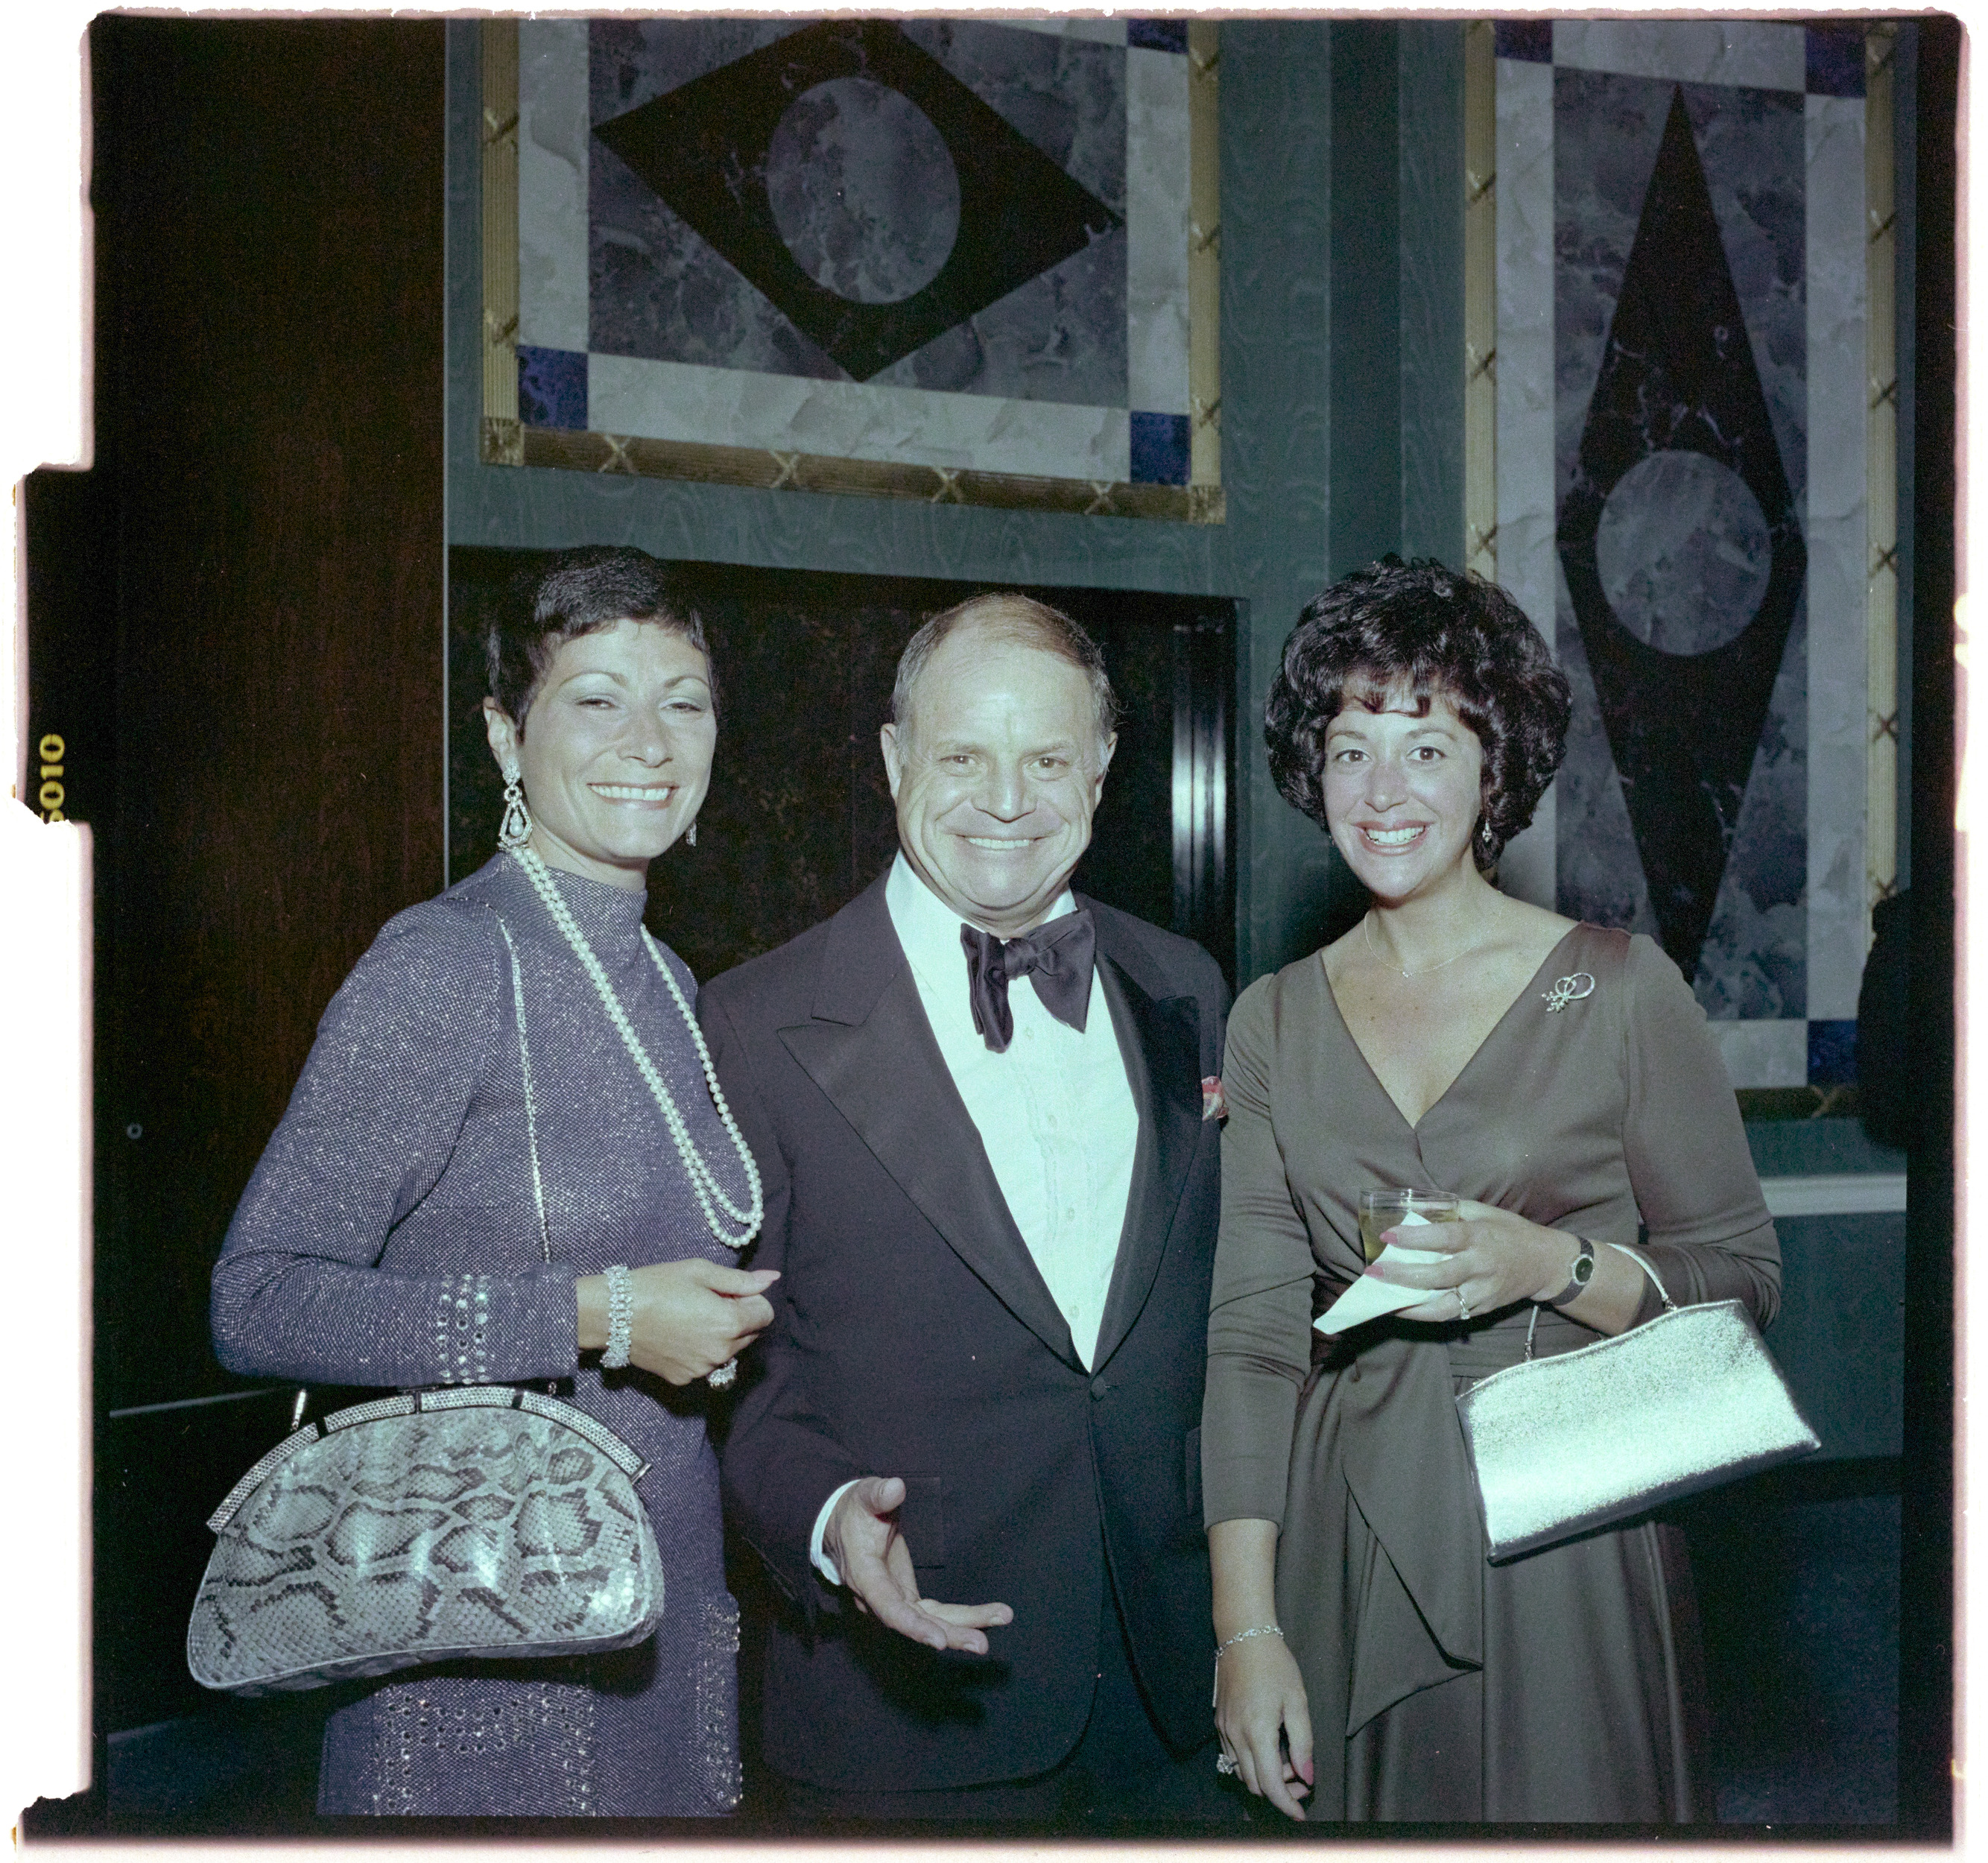 Photographs of Combined Jewish Appeal (Israel Bonds Dinner), image 05